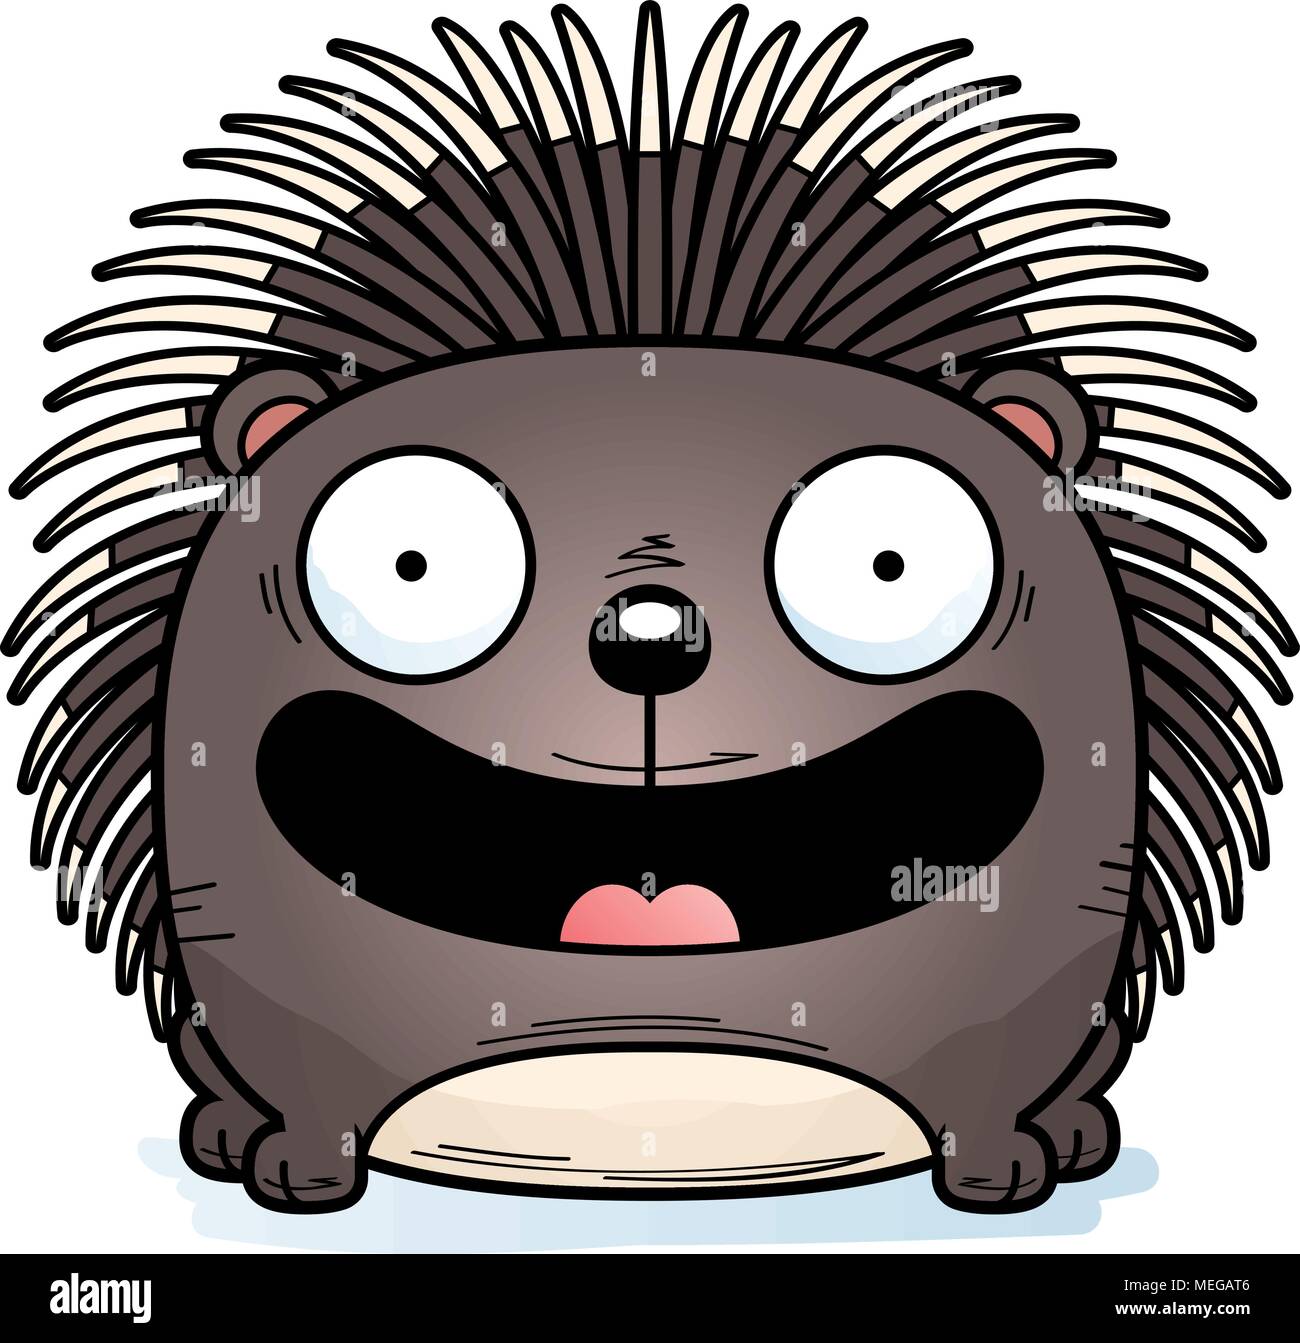 A Cartoon Illustration Of A Porcupine Happy And Smiling Stock Vector Image And Art Alamy 